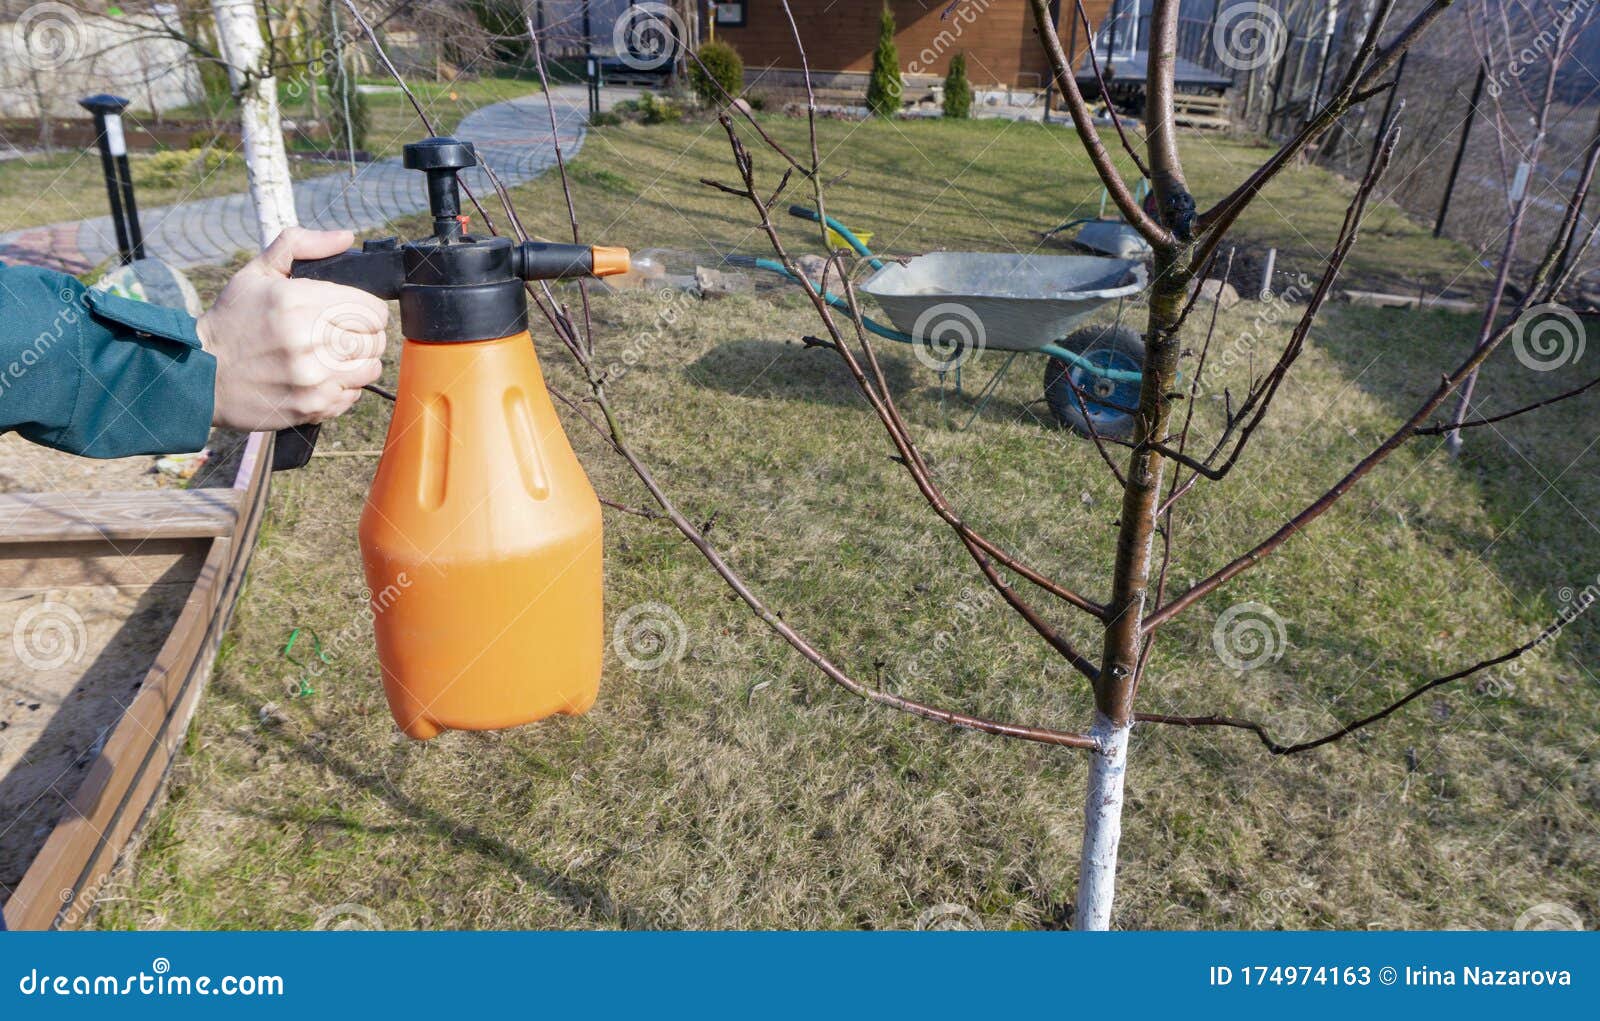 spraying fruit trees with a pump sprayer with insecticides and fungicides in the spring season. treatment of apple trees with